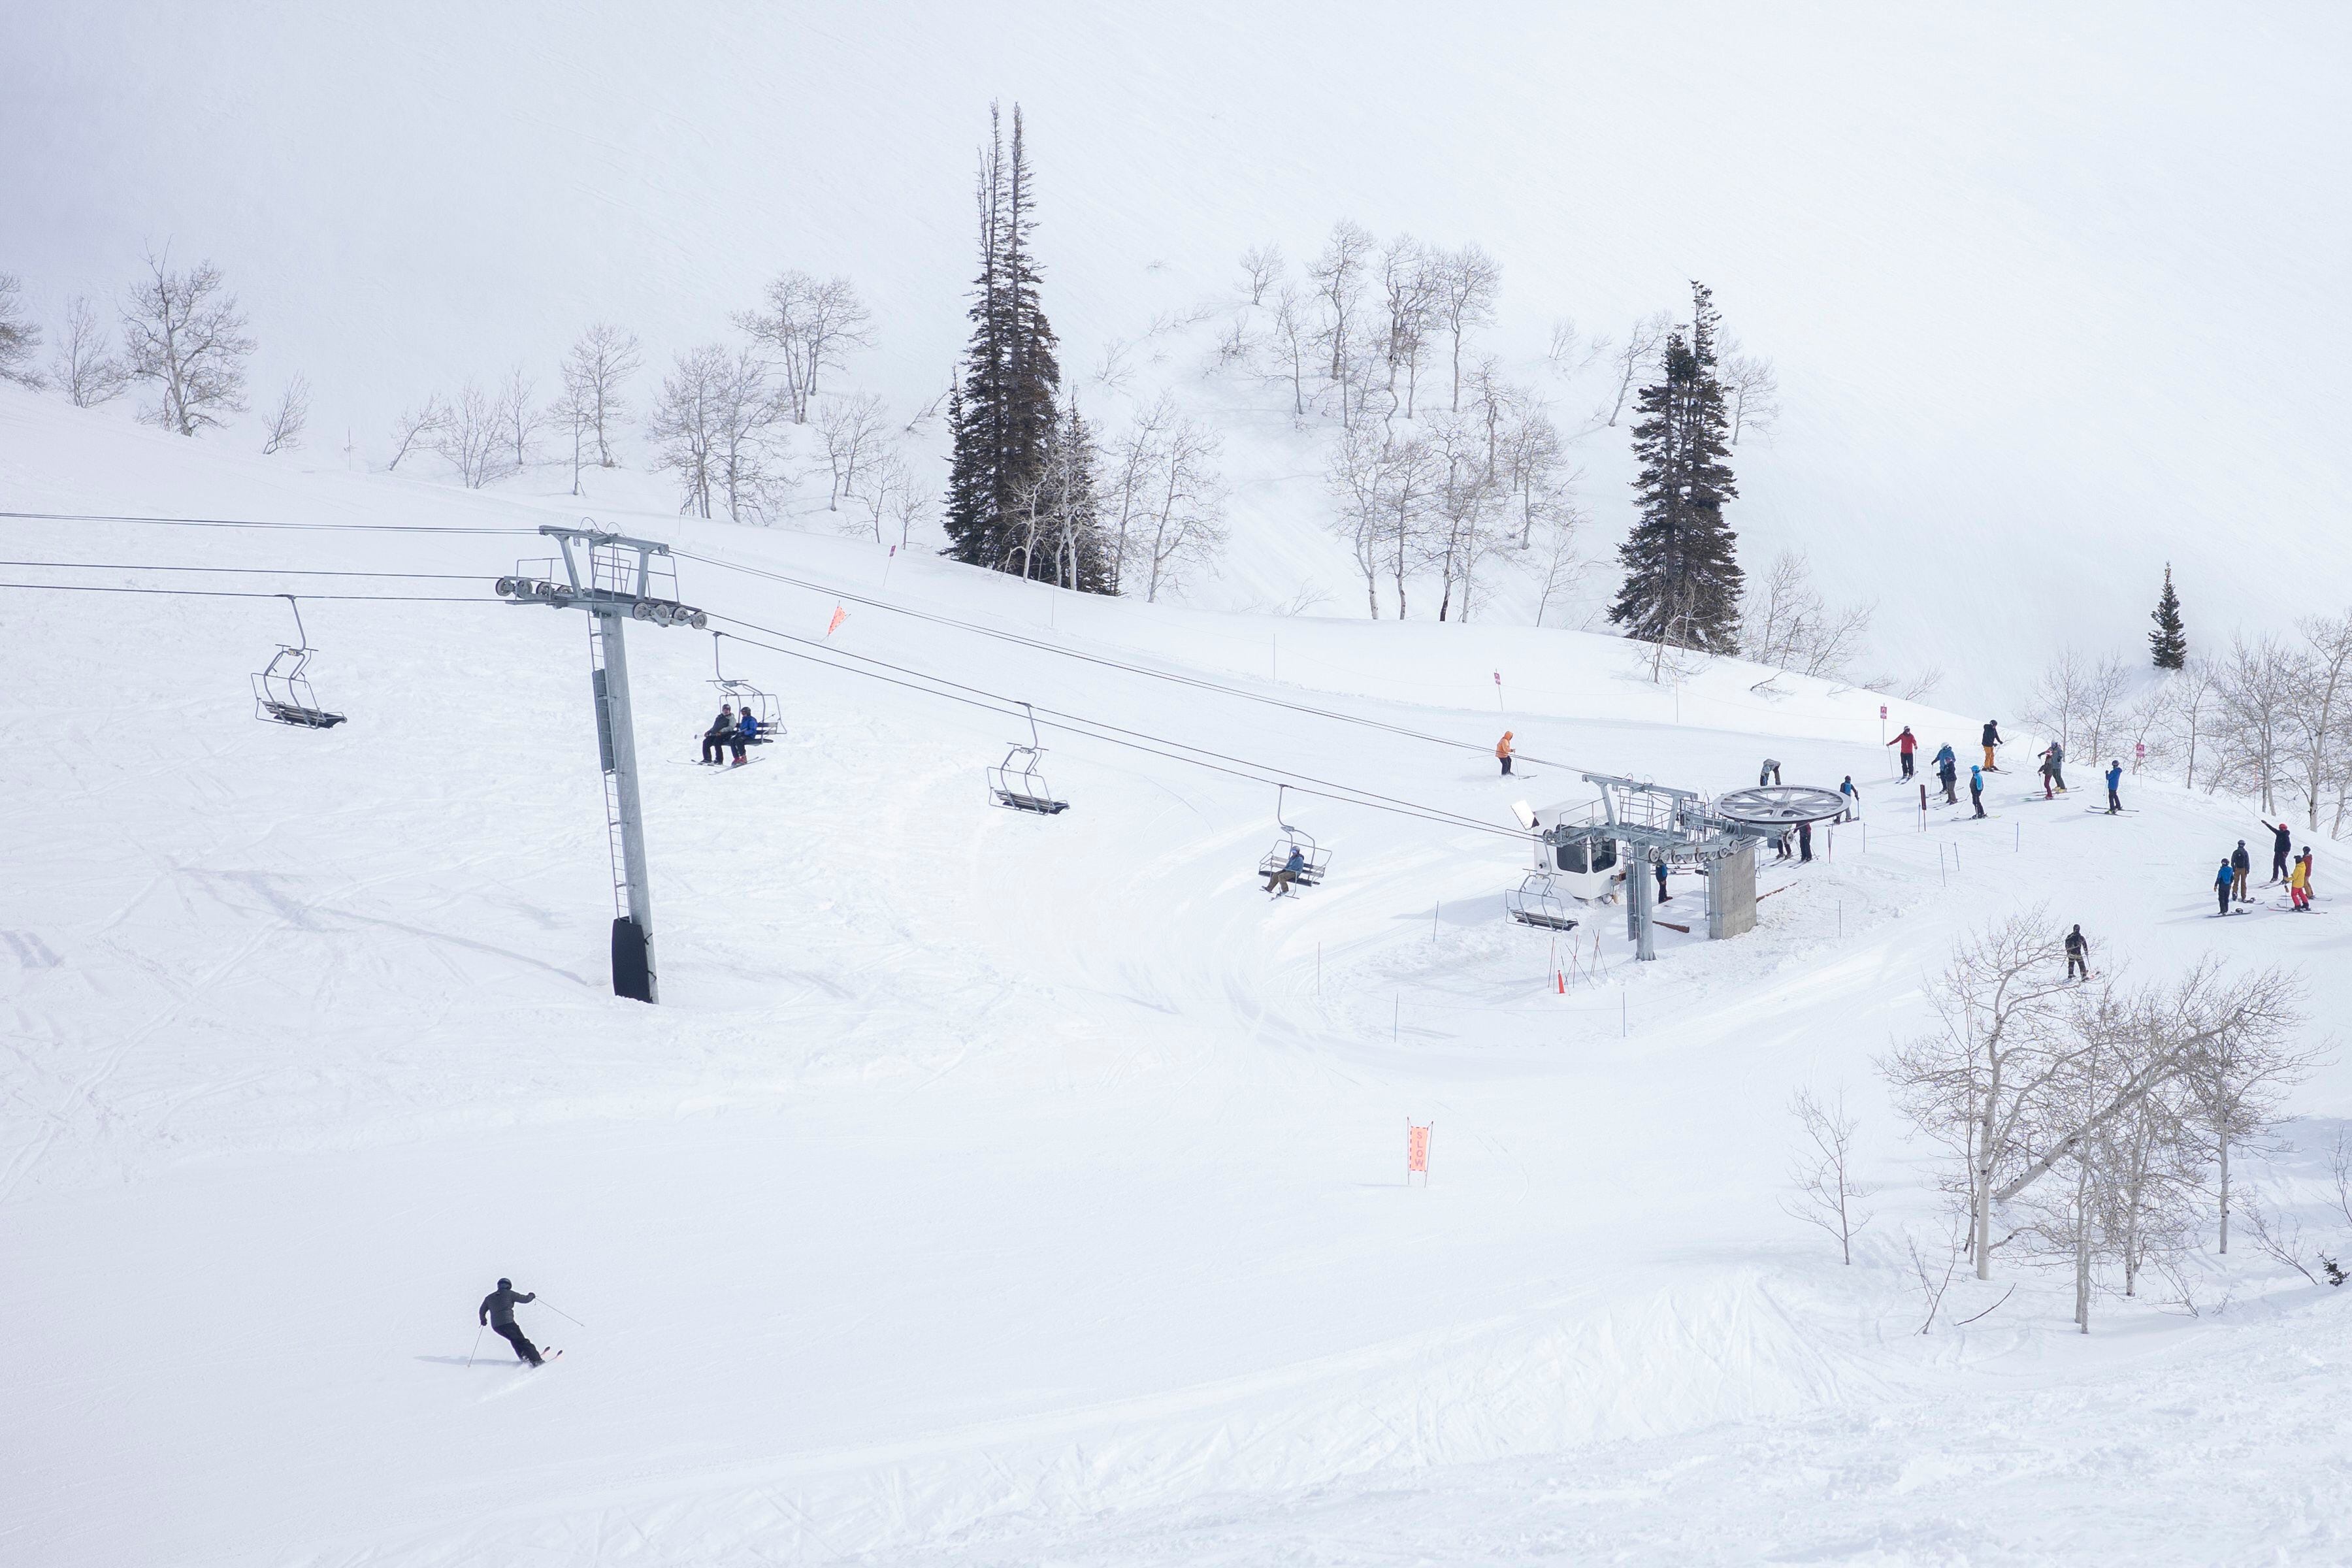 (Alex Goodlett | The New York Times) The Village chairlift at Powder Mountain in Eden, Utah, March 11, 2024. Starting next year, the Village chairlift will be reserved for homeowners who also pay a hefty annual fee.